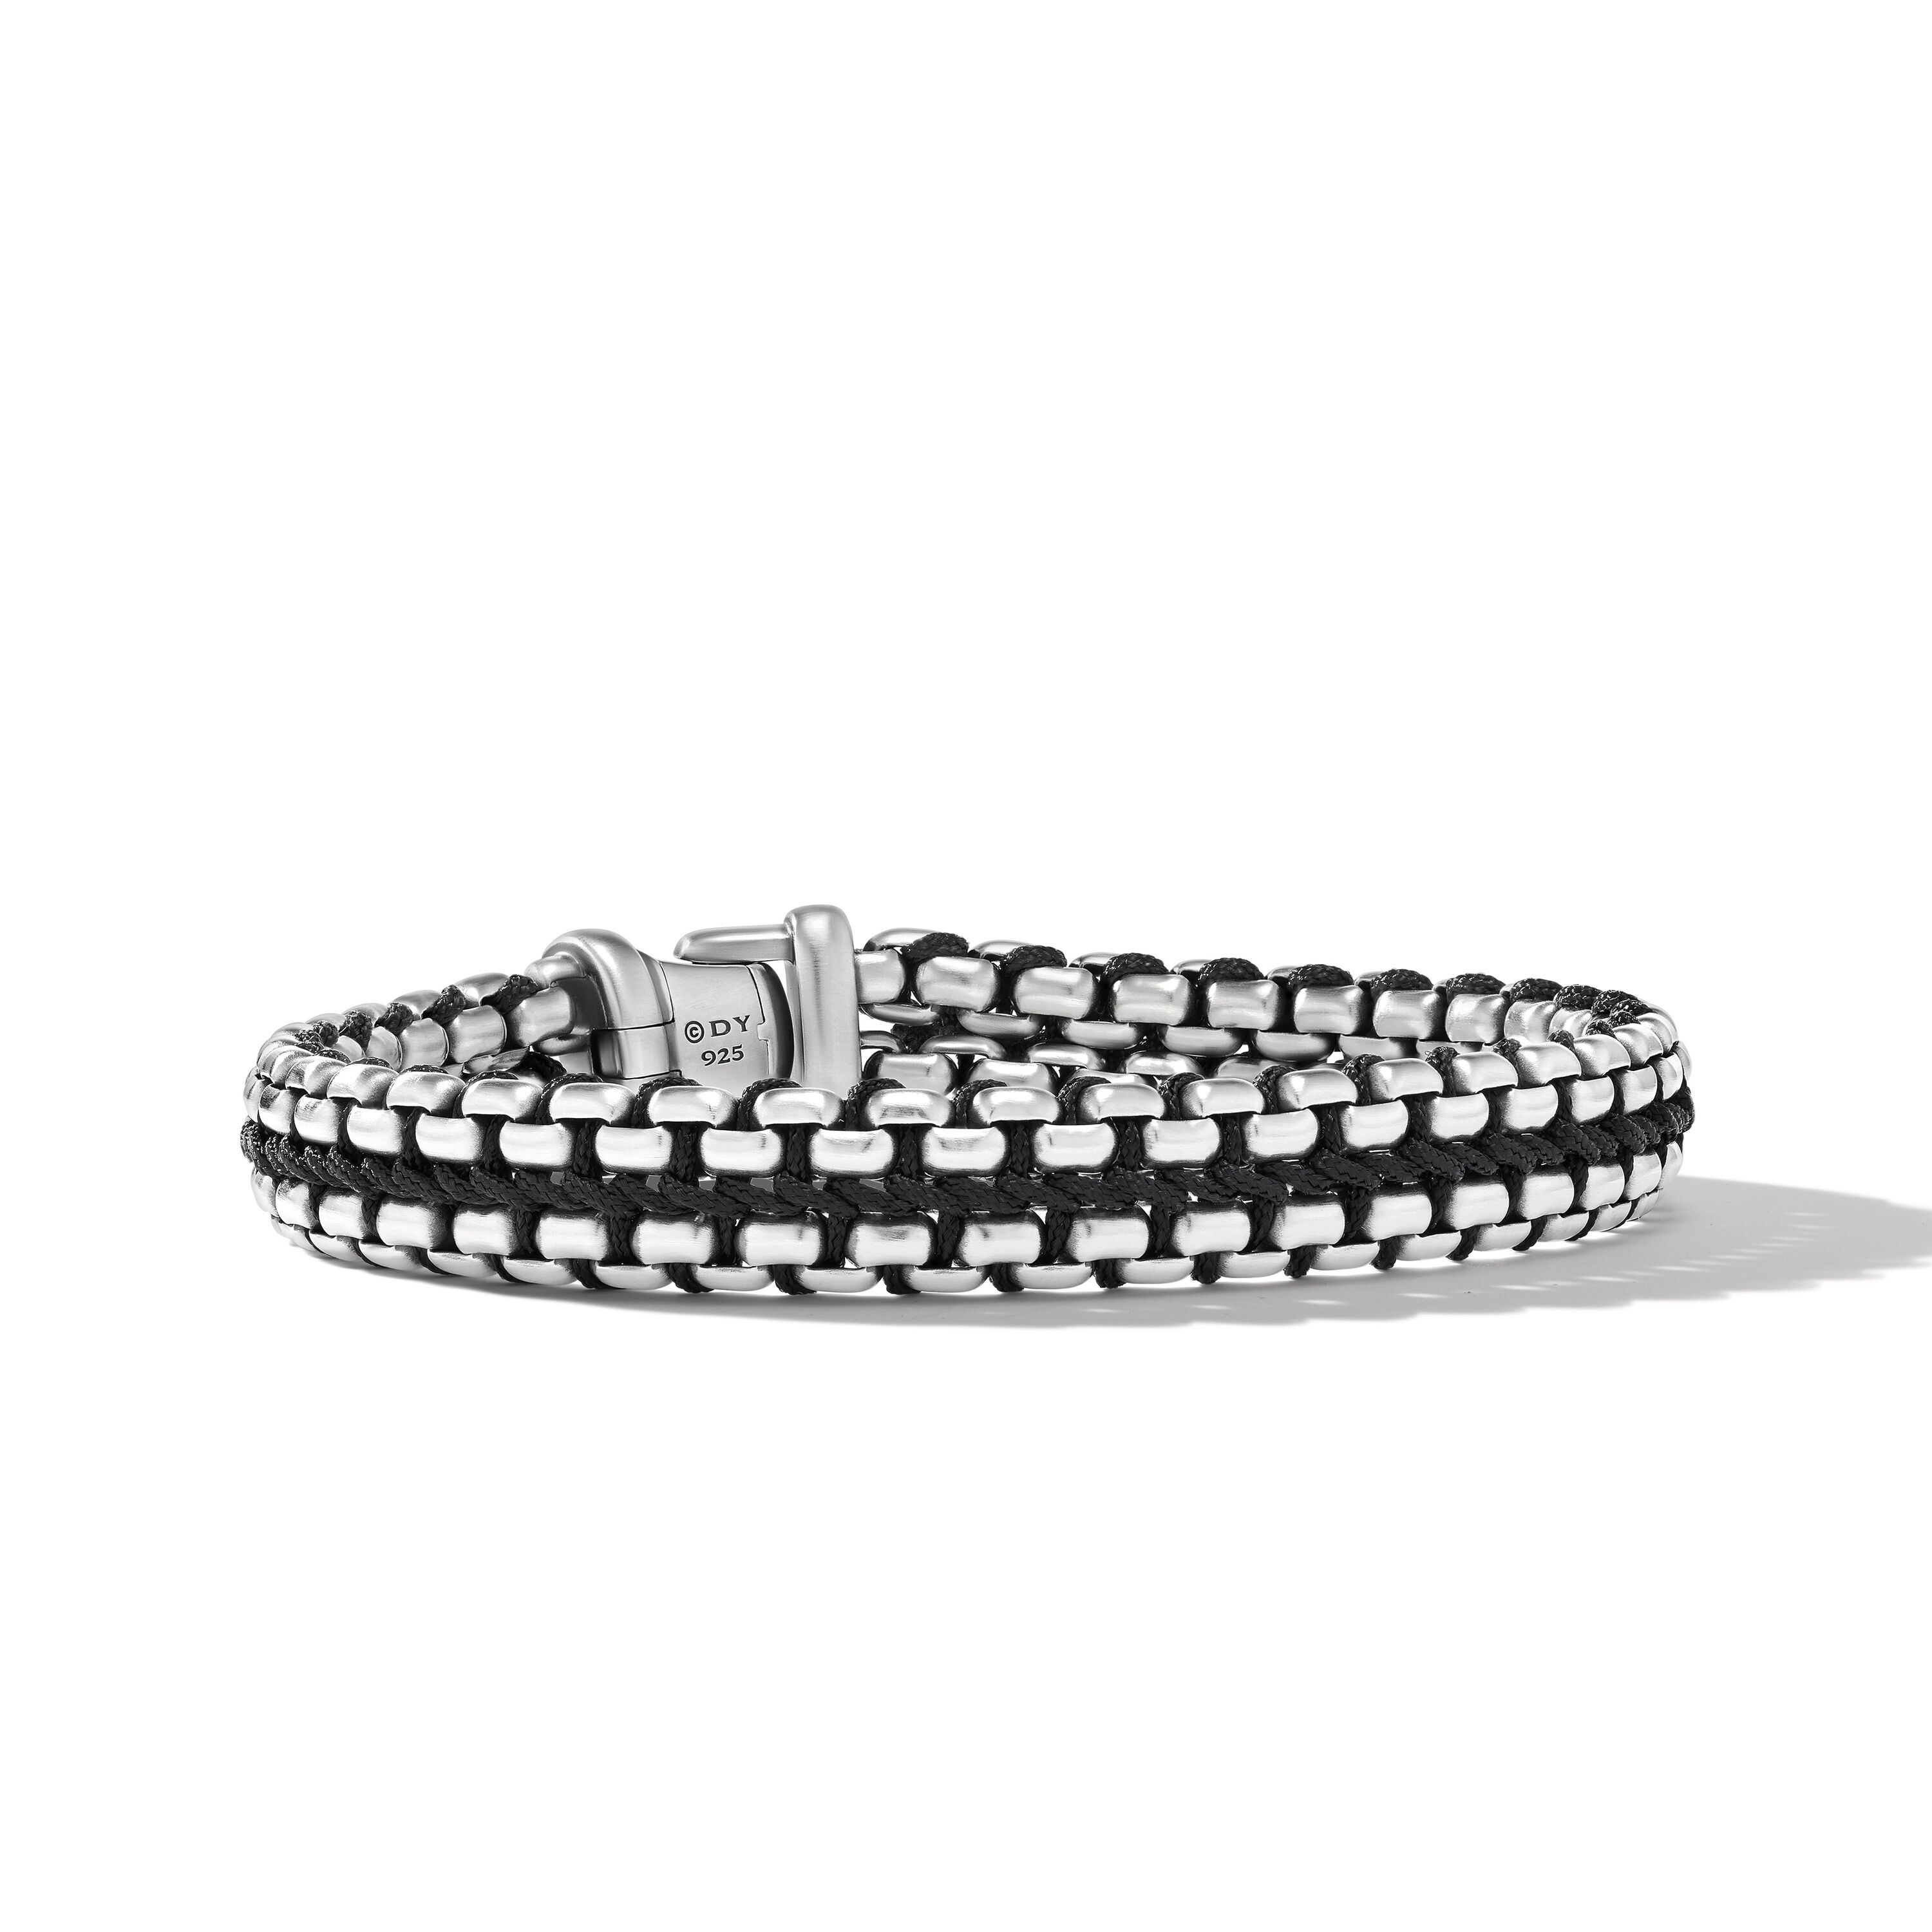 Woven Box Chain Bracelet in Sterling Silver with Black Nylon, 12mm